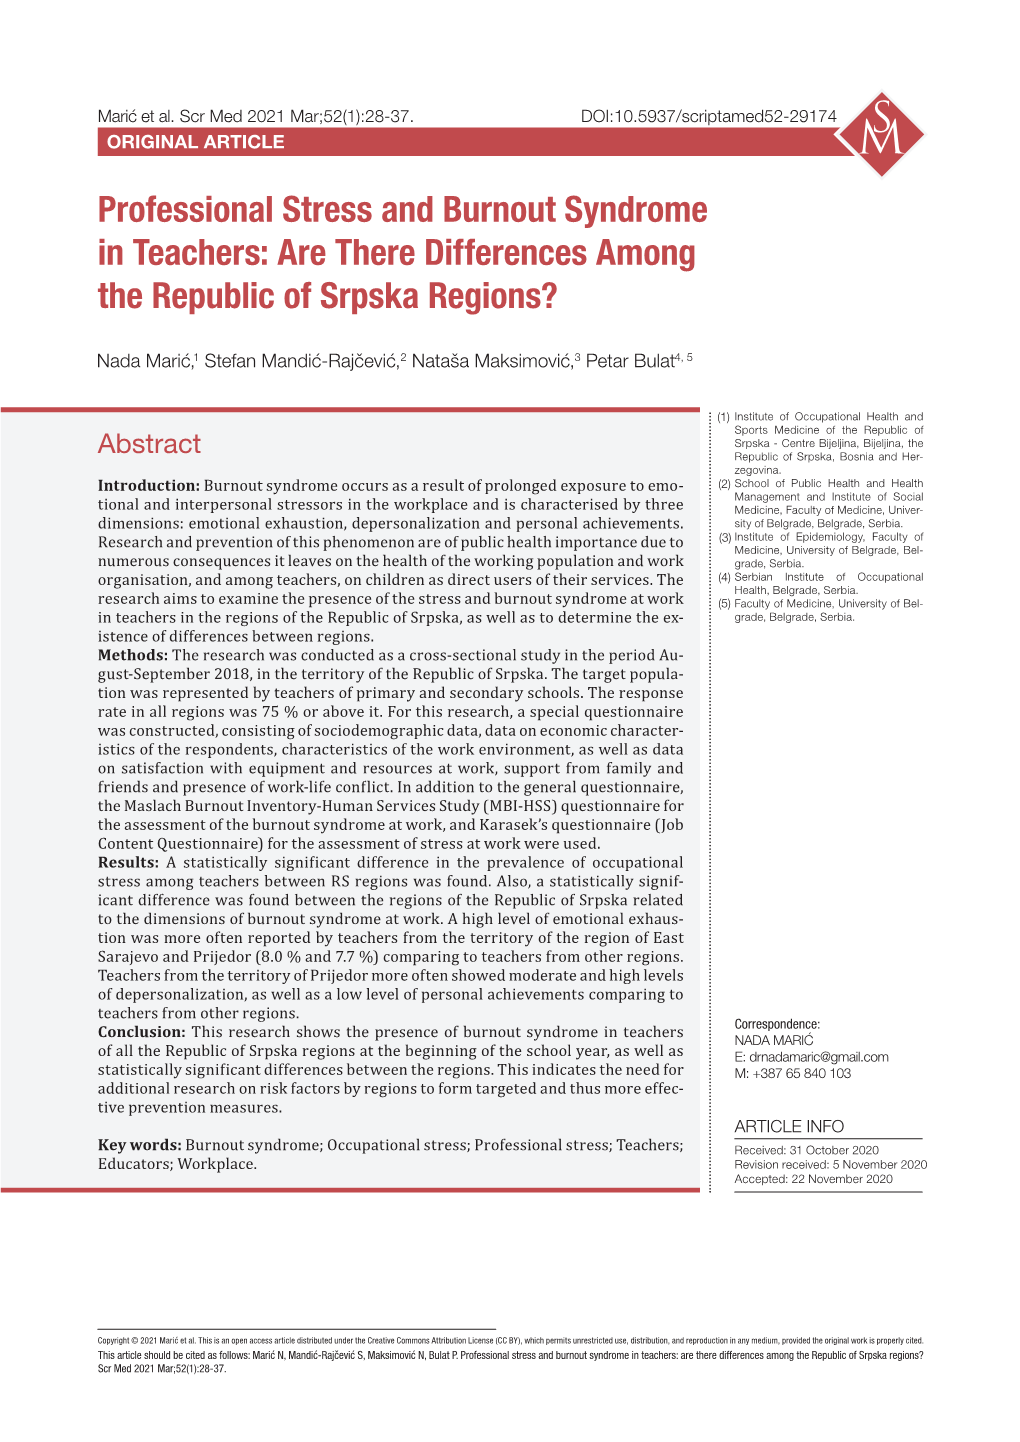 Professional Stress and Burnout Syndrome in Teachers: Are There Differences Among the Republic of Srpska Regions?